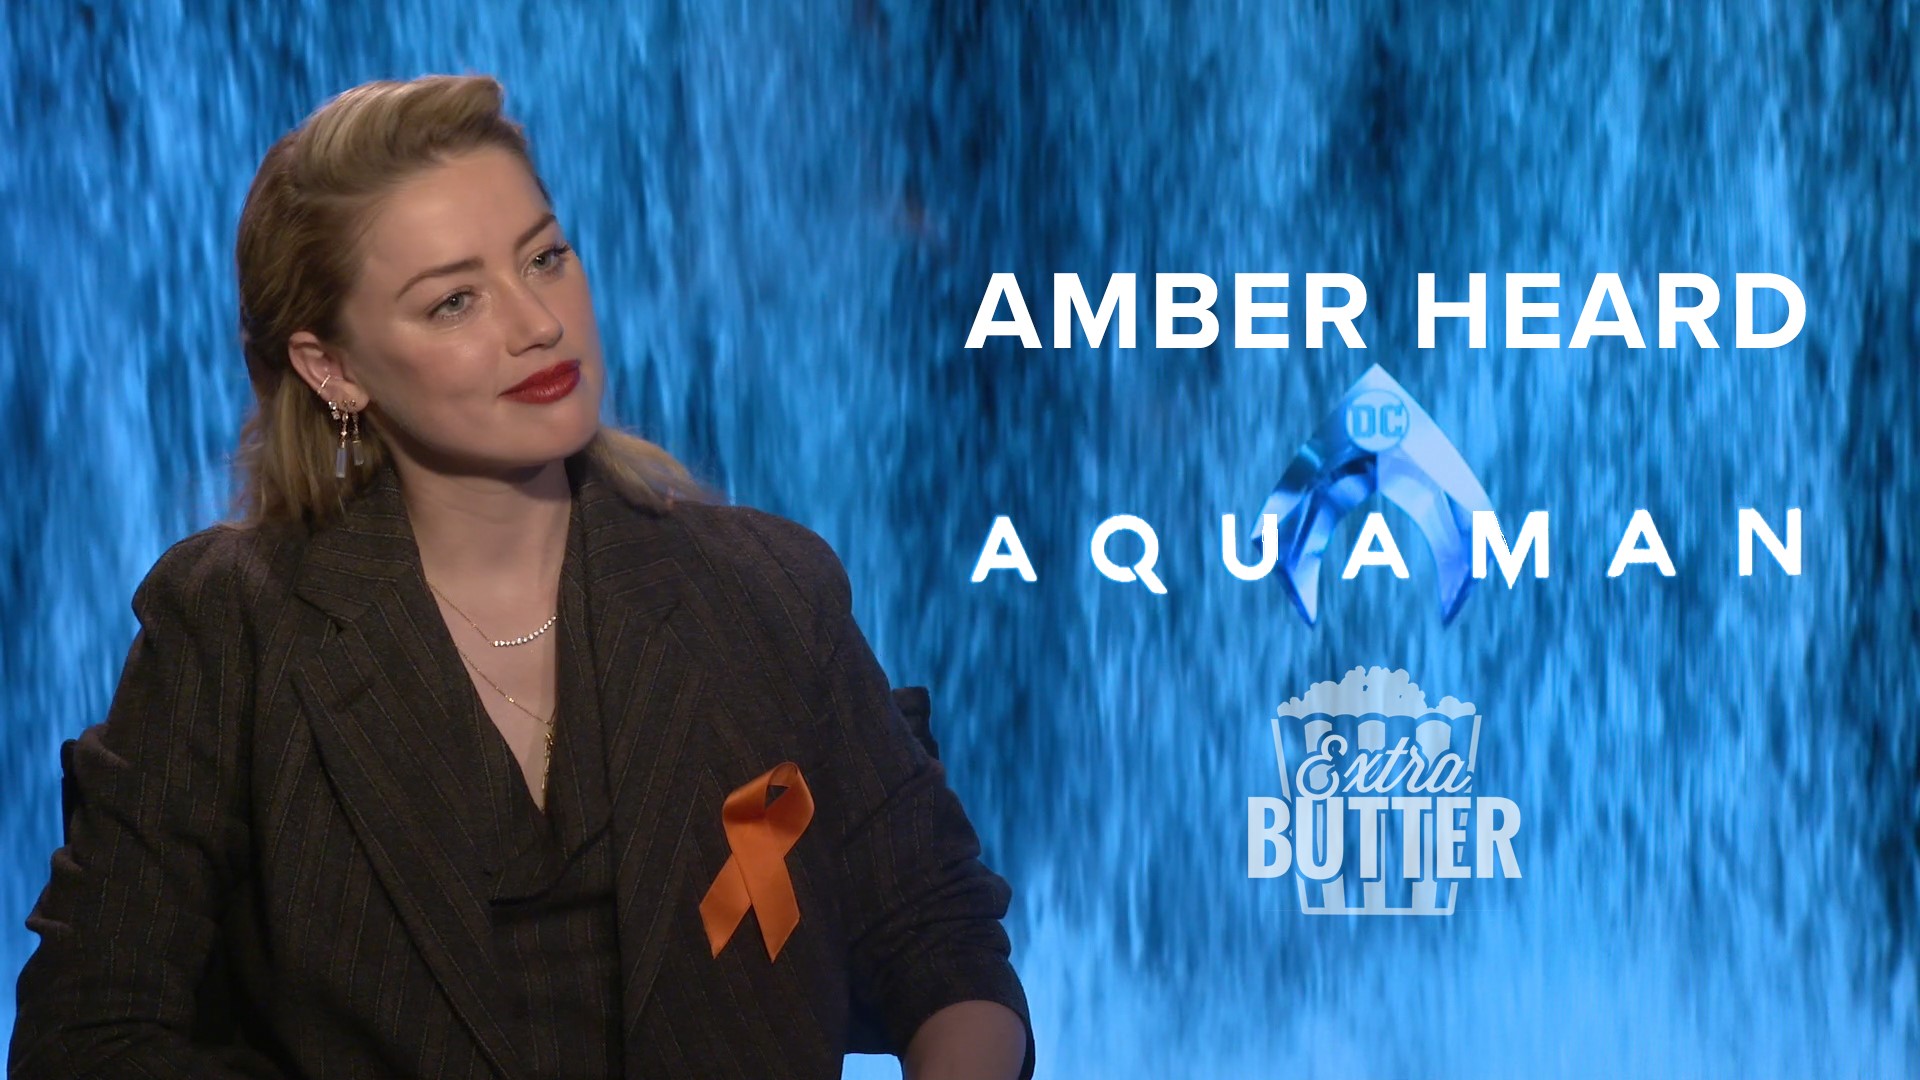 Amber Heard talks about her role of Mera in the new "Aquaman" movie. Amber tells Mark S. Allen about why it is important to have a superhero who is a woman and discusses the #MeToo movement. Watch Extra Butter every Friday morning at 9:30 a.m. on ABC10. Interview provided by Warner Bros. Pictures